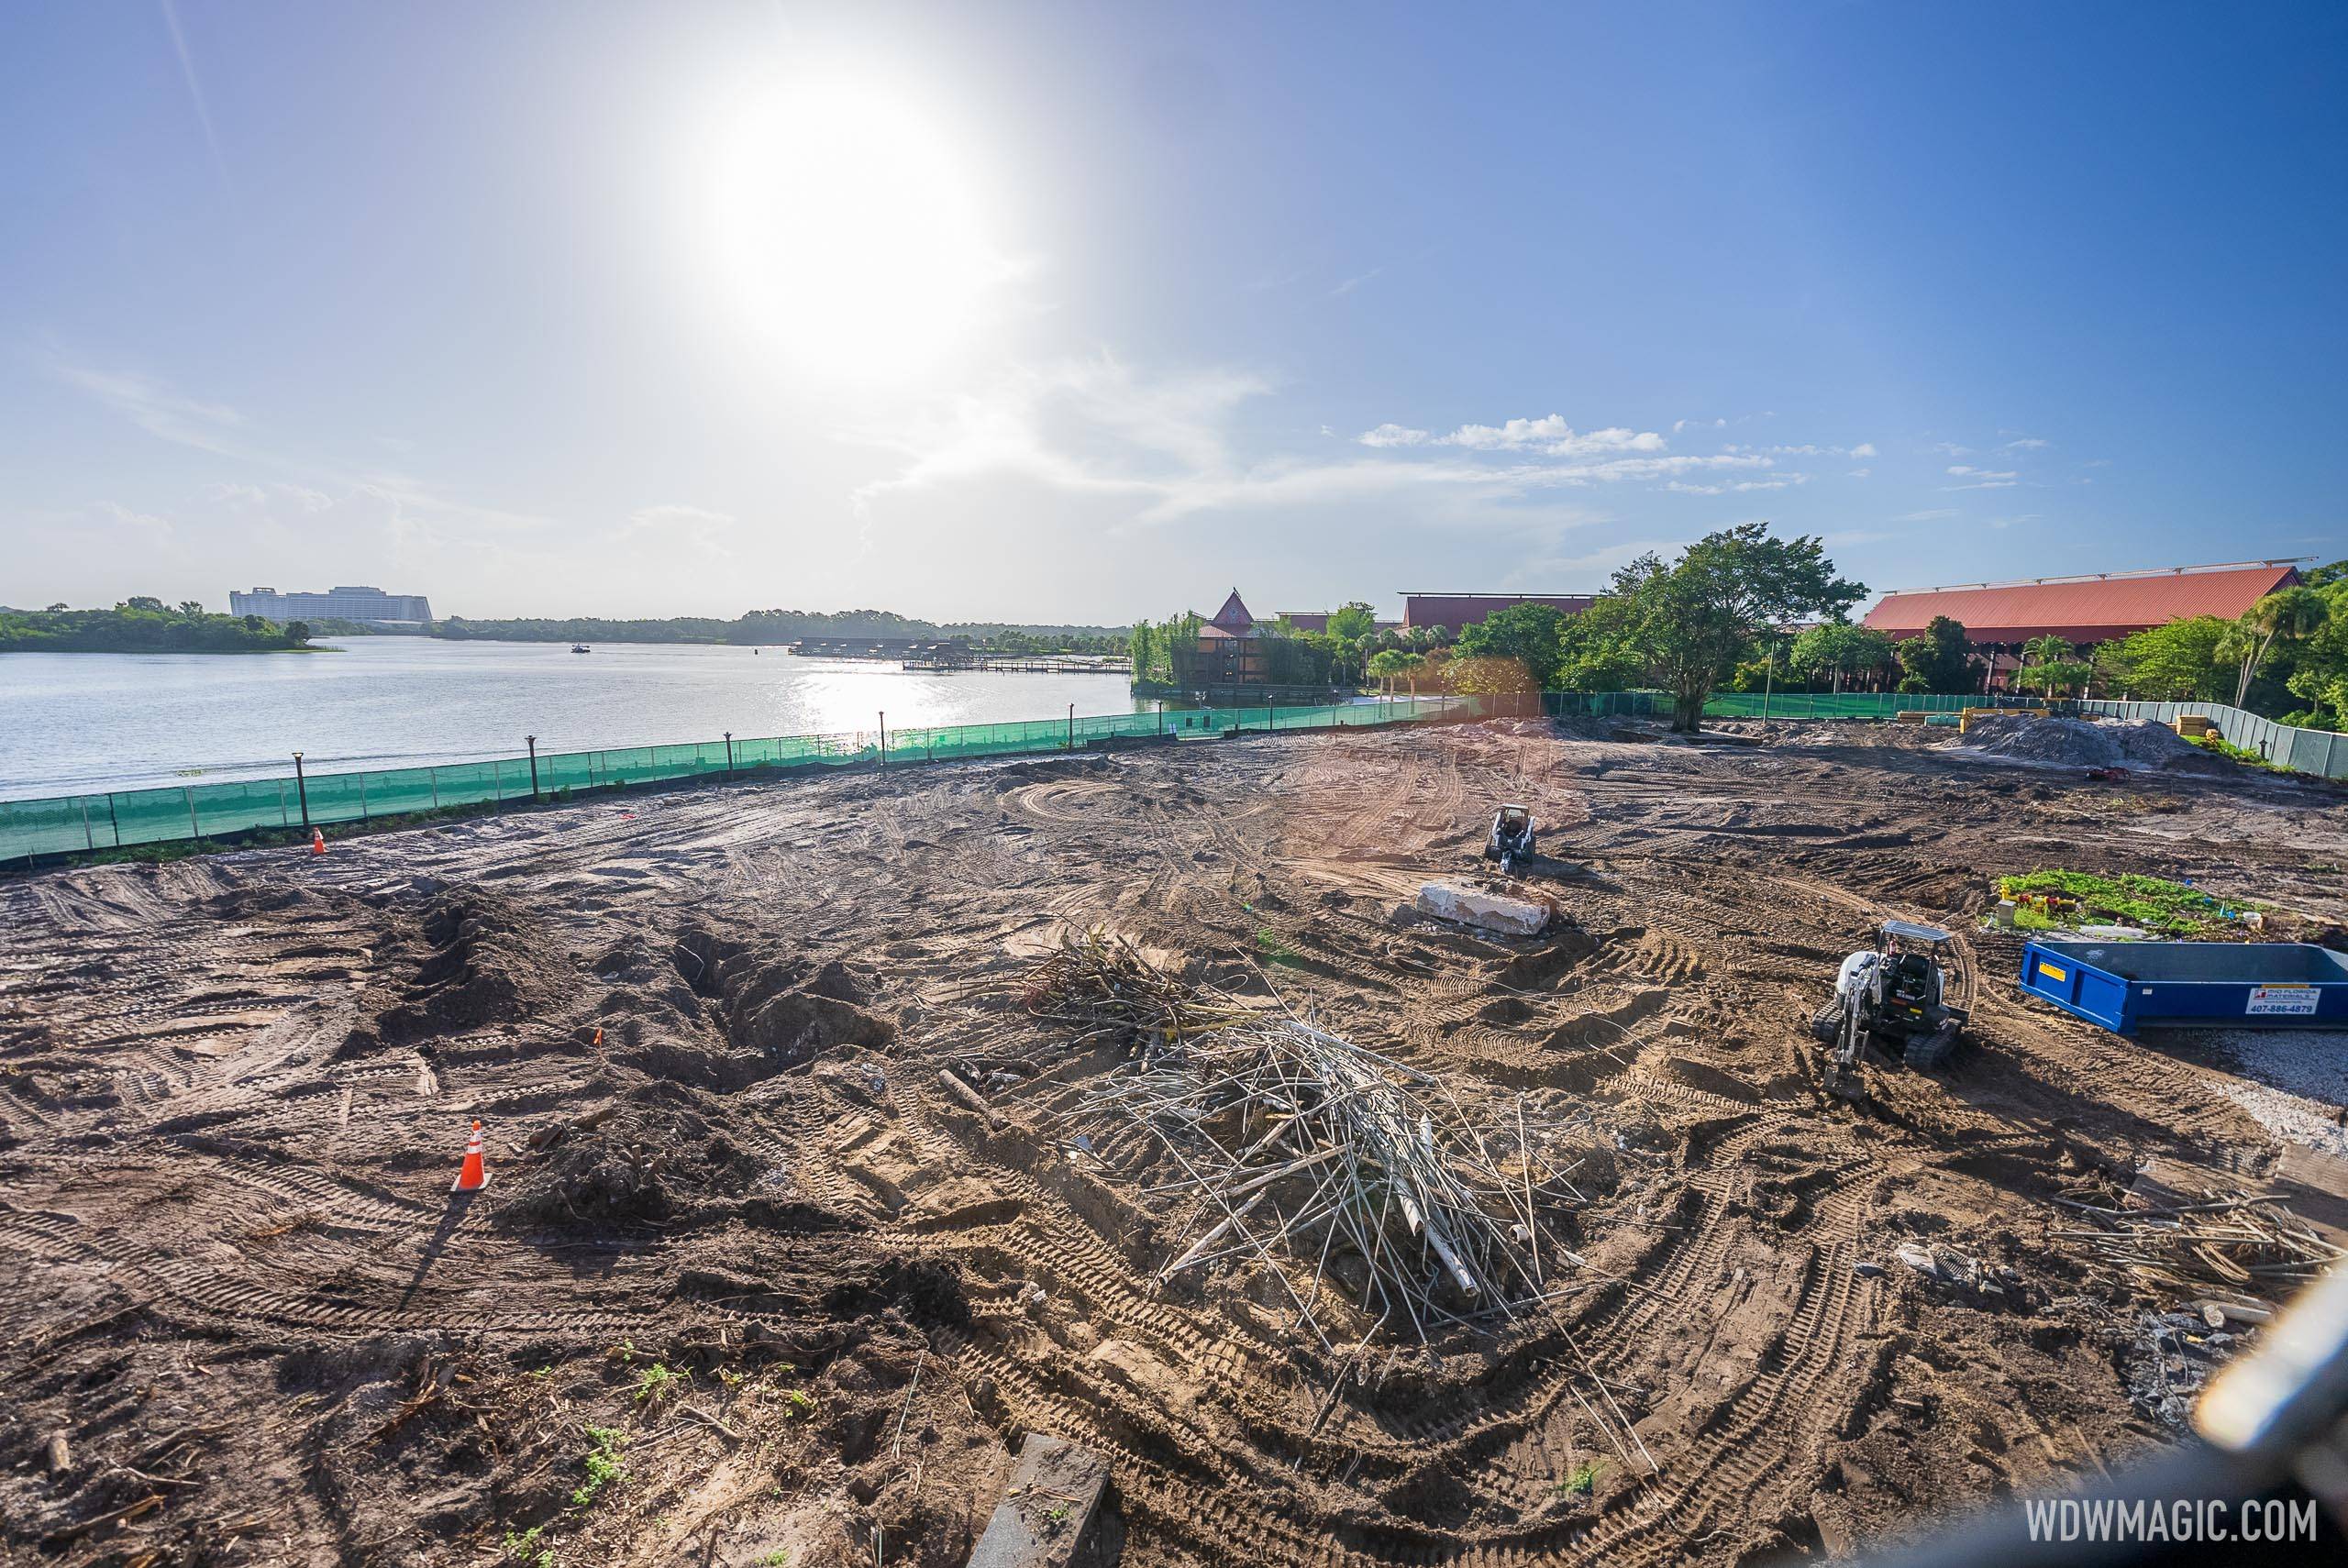 Ground cleared for the new Disney Vacation Club tower at Disney's Polynesian Village Resort